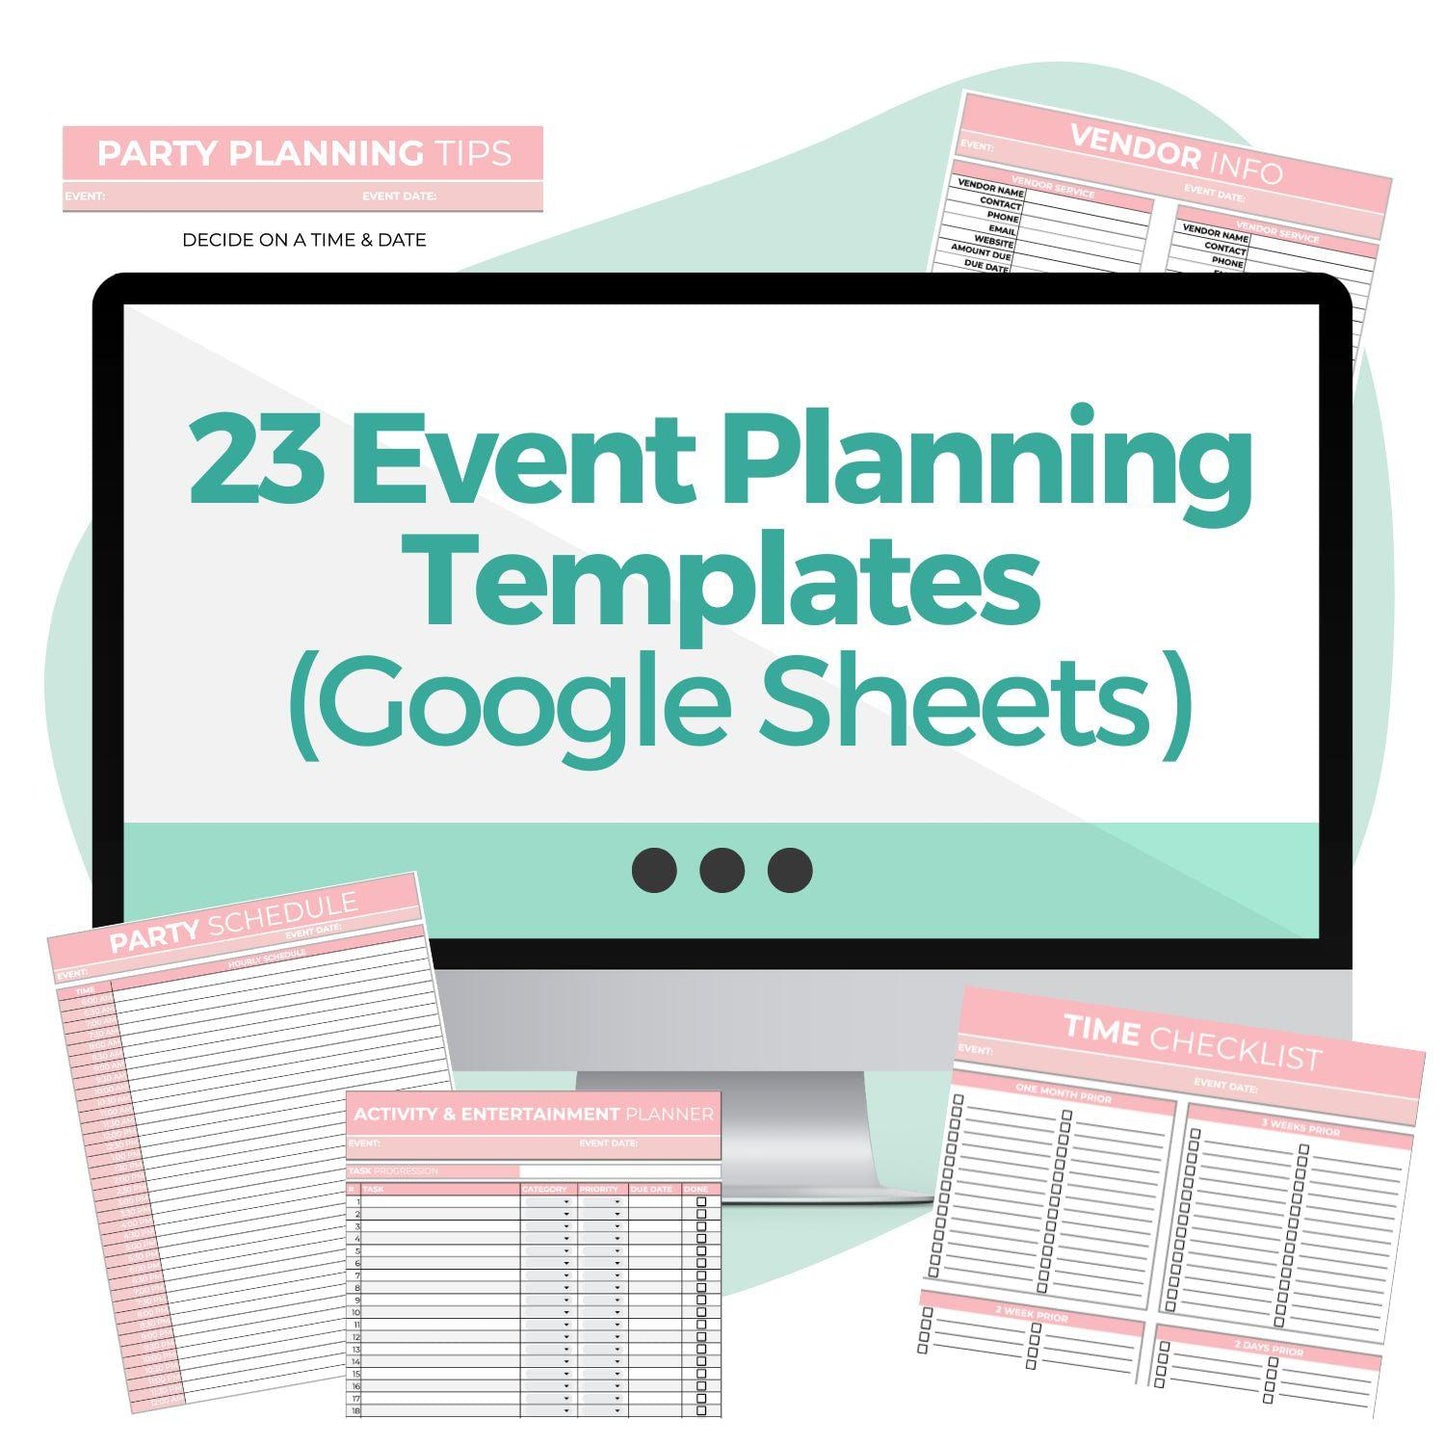 same as hero image but includes screenshots of the event planning checklists and spreadsheets